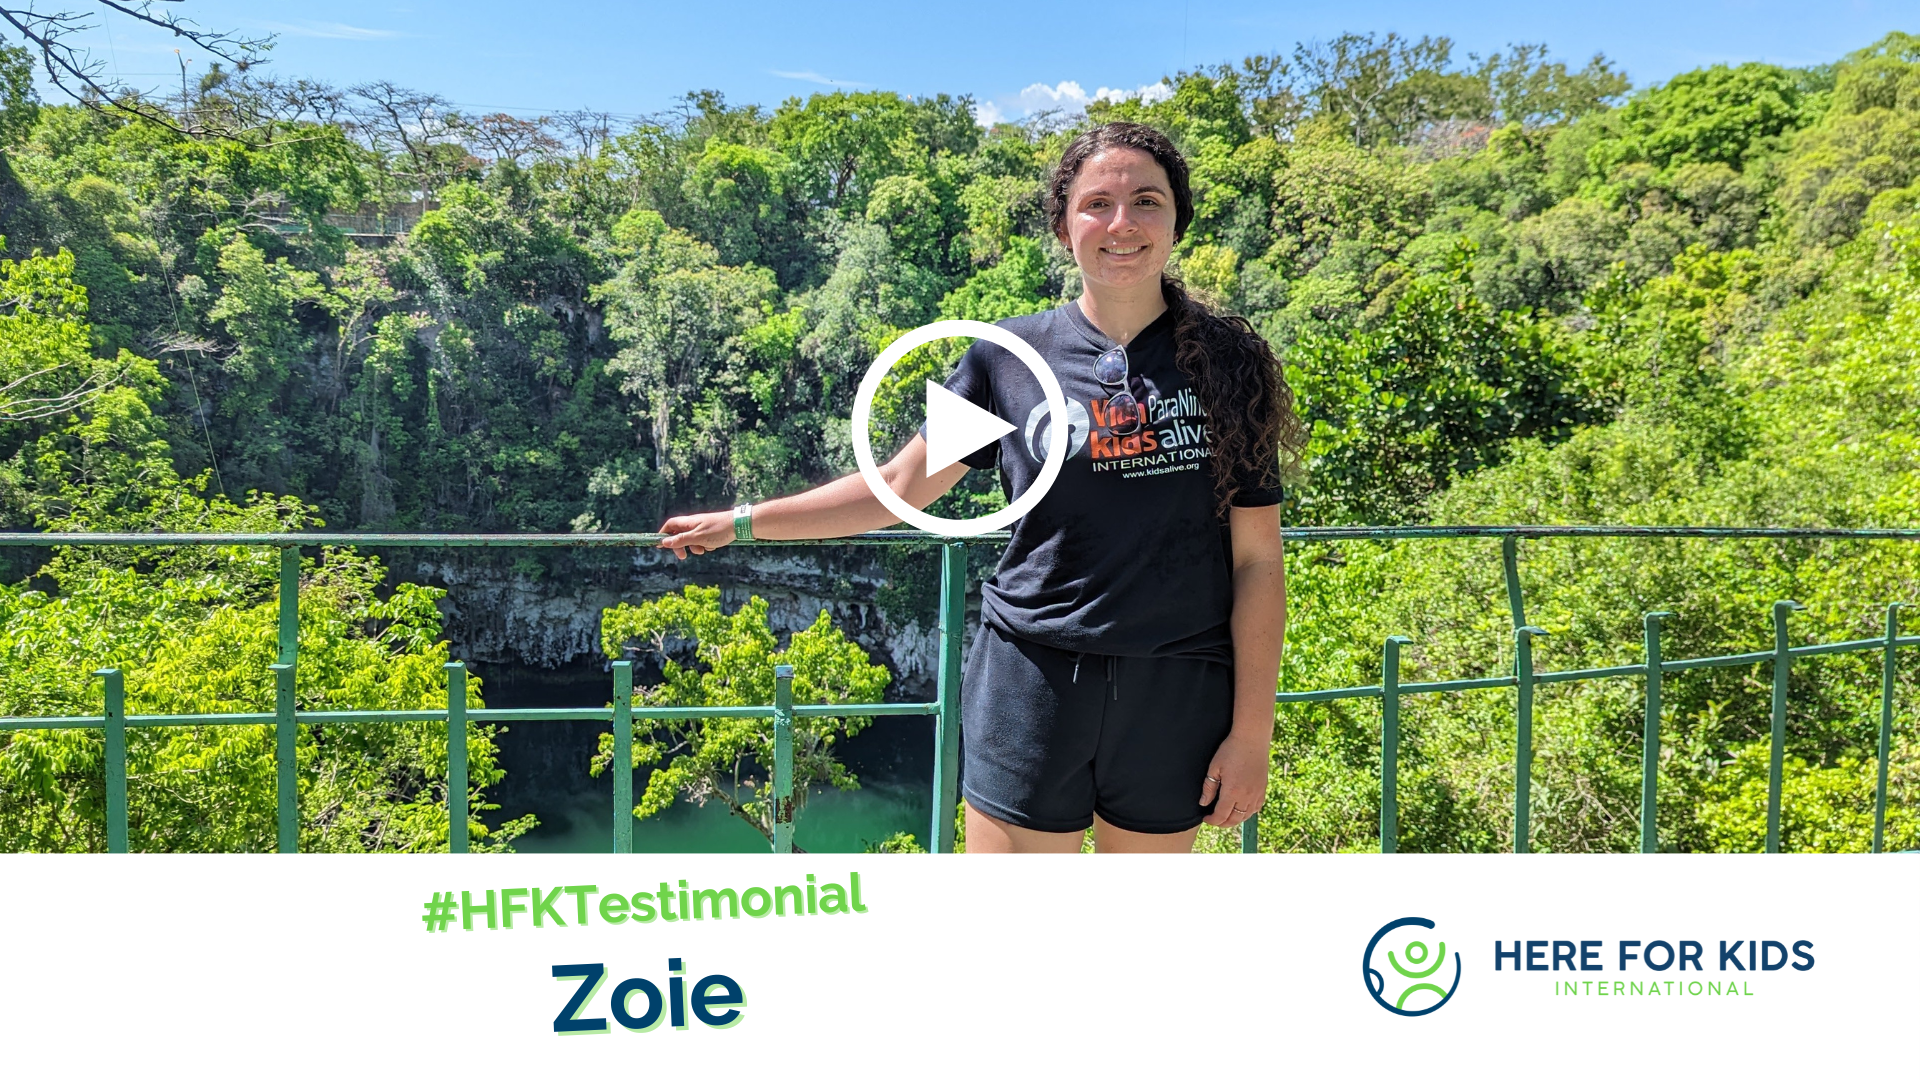  As a first timer on an HFK trip, Zoie shares about her experience serving with us and why she chose to say YES!  